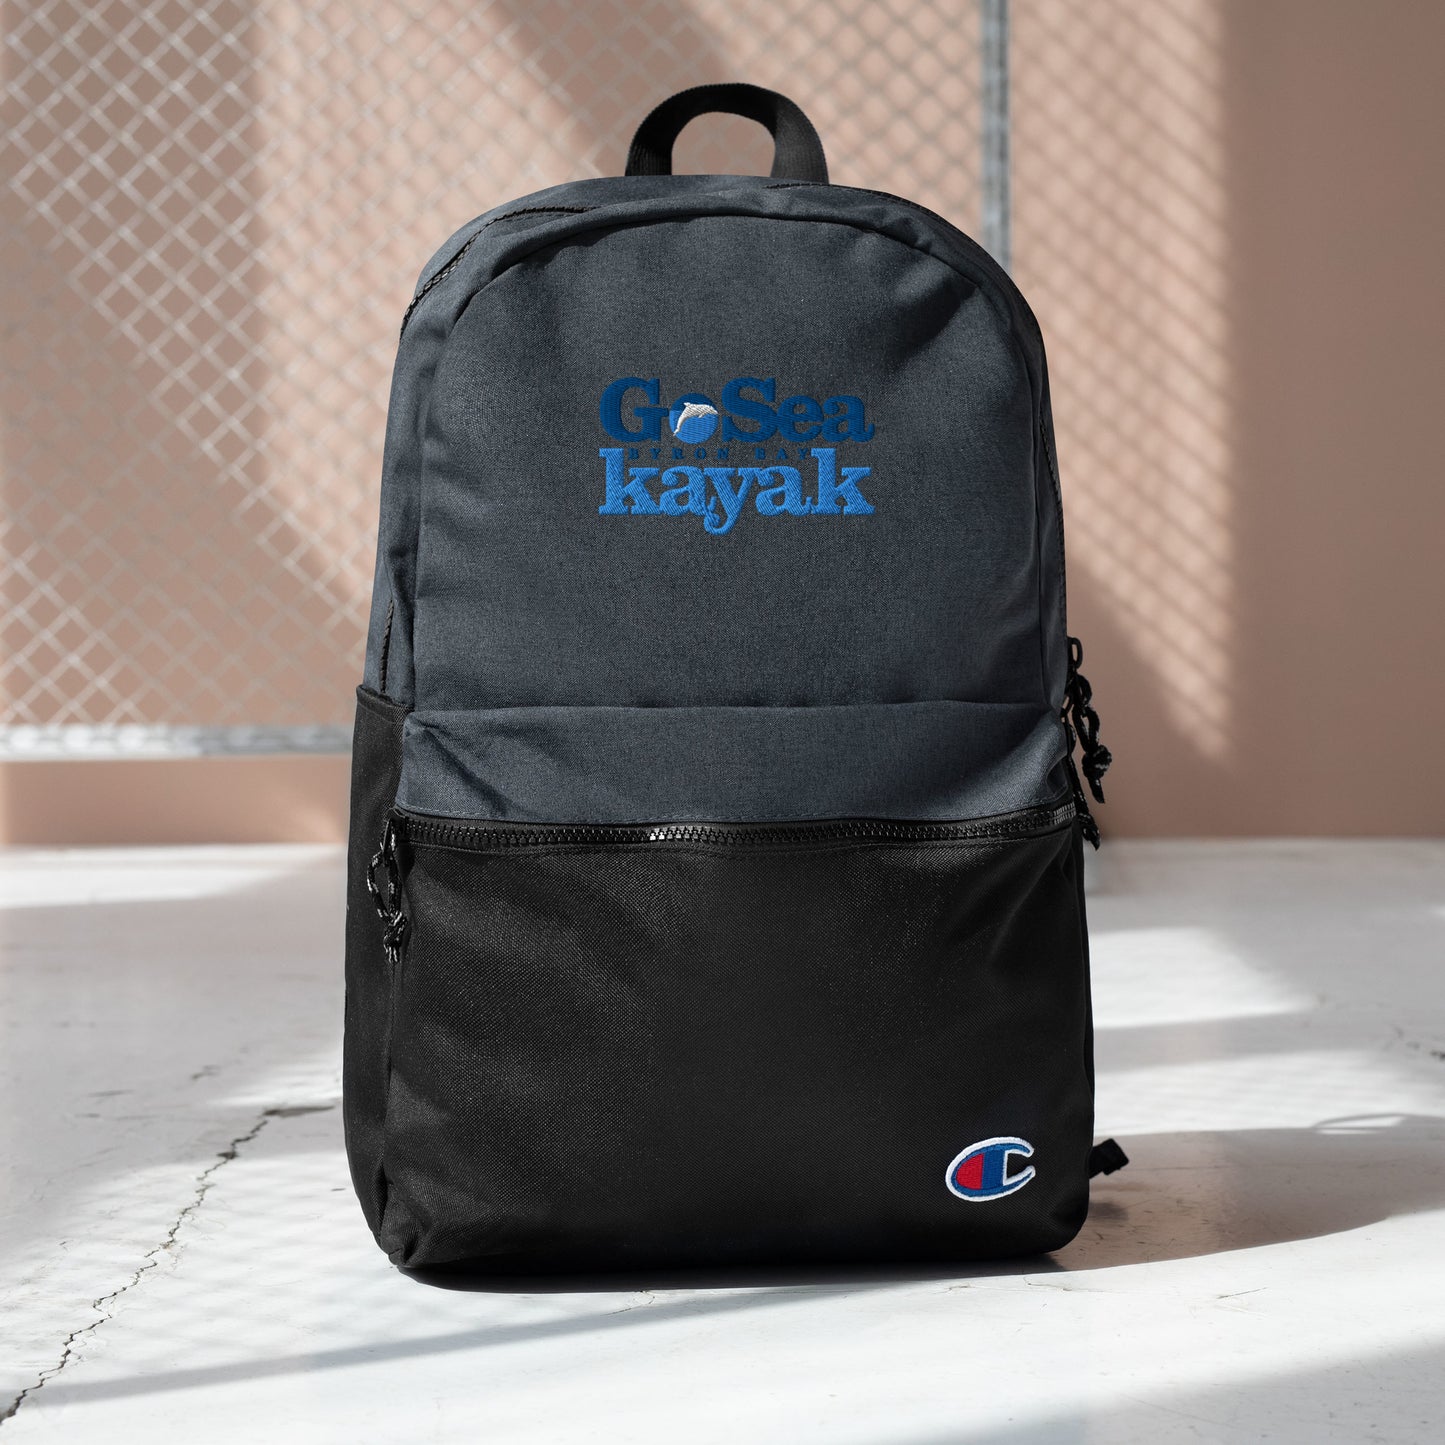  Champion Backpack - Black - Front view - Bag sitting on floor in front of fence - With Go Sea Kayak Byron Bay logo on front  - Genuine Byron Bay Merchandise | Produced by Go Sea Kayak Byron Bay 